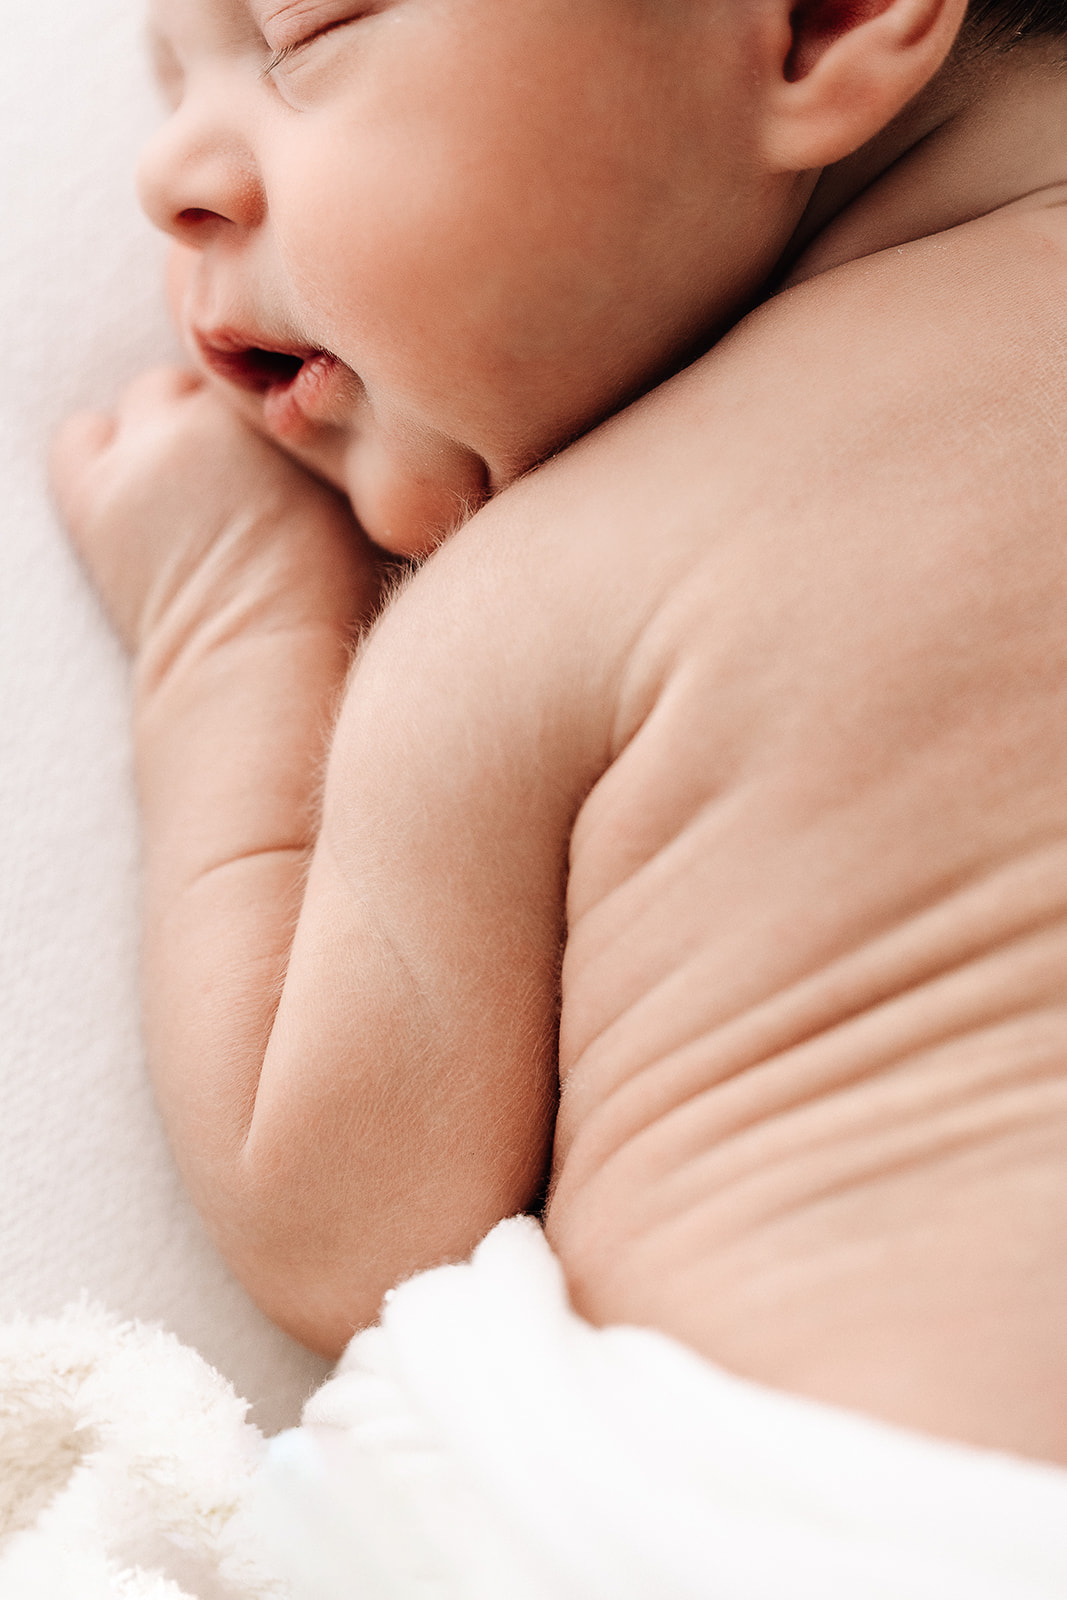 Details of a newborn baby sleeping with hairy arms